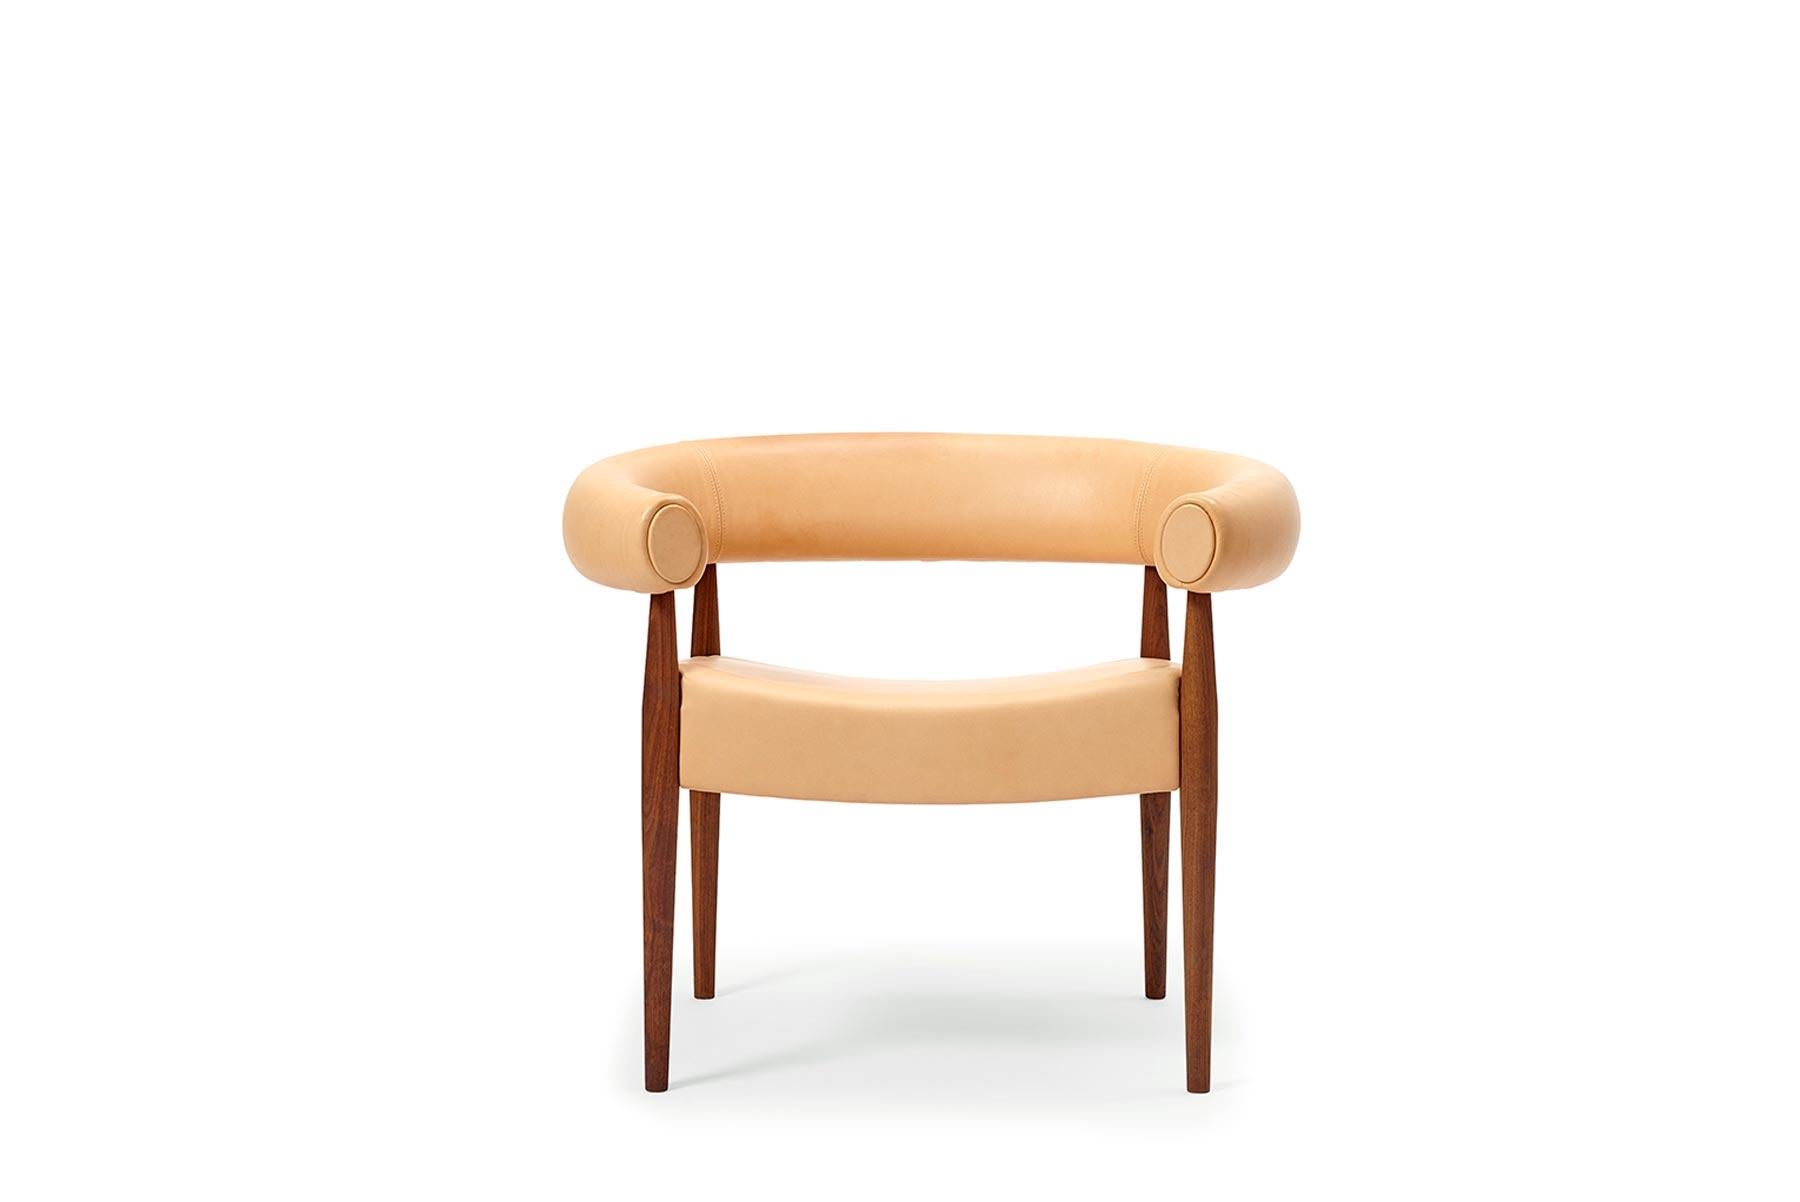 Designed by Nanna and Jørgen Ditzel in 1958, the Ring chair is one of the couple’s most elegant and iconic designs. The chair is handcrafted at GETAMA’s factory in Gedsted, Denmark by skilled cabinetmakers using traditional Scandinavian